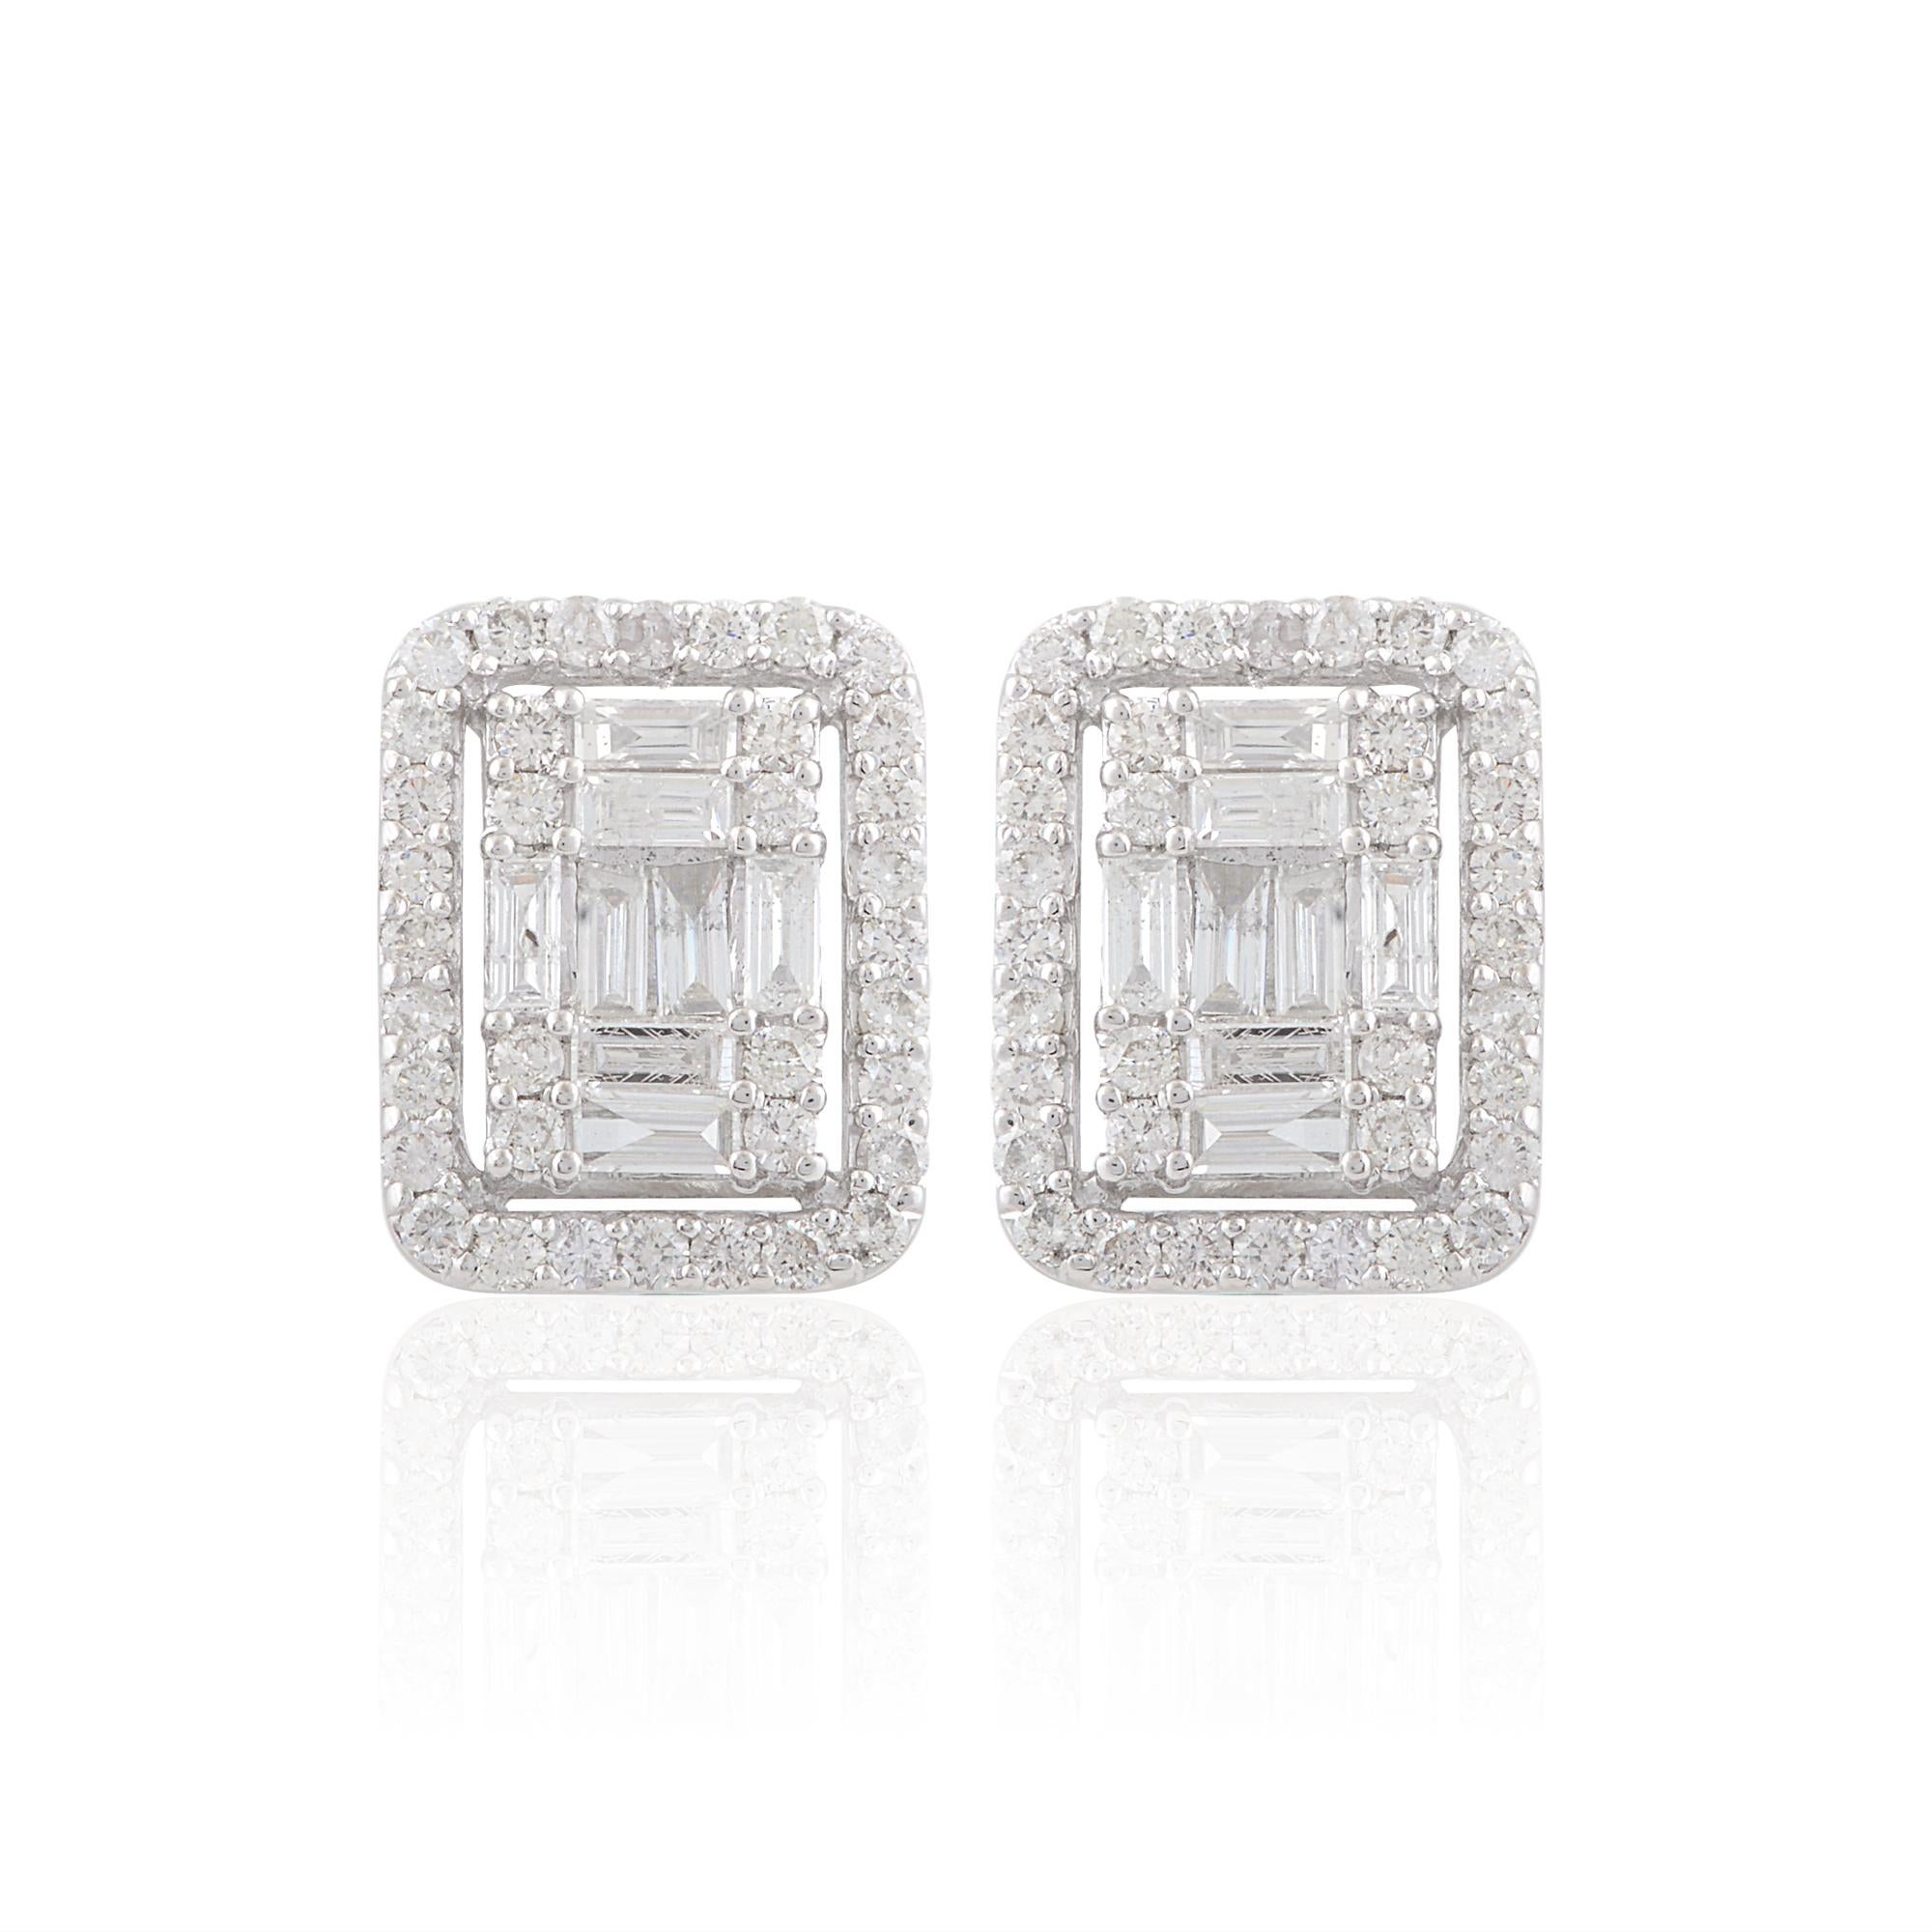 Item Code:- STE-1026
Gross Weight :- 3.43 gm
10k Solid White Gold Weight :- 3.172 gm
Natural Diamond Weight :- 1.29 ct.  ( AVERAGE DIAMOND CLARITY SI1-SI2 & COLOR H-I )
Earrings Size :- 14 x 10 mm approx.

✦ Sizing
.....................
We can